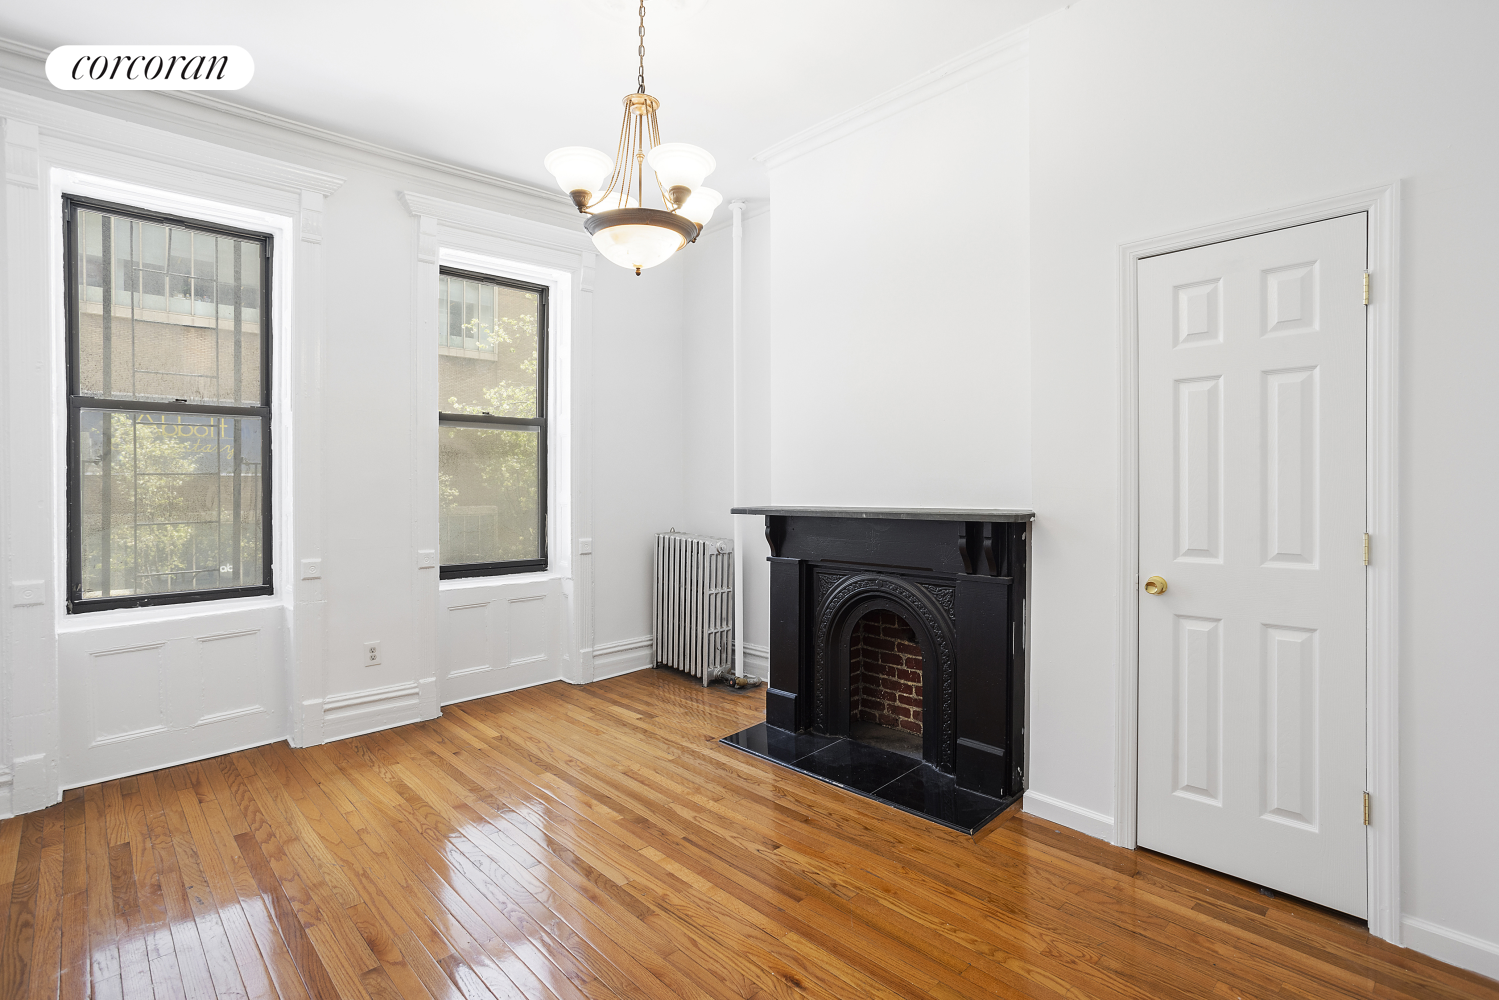 156 Columbus Avenue 2S, Lincoln Sq, Upper West Side, NYC - 3 Bedrooms  
1 Bathrooms  
6 Rooms - 